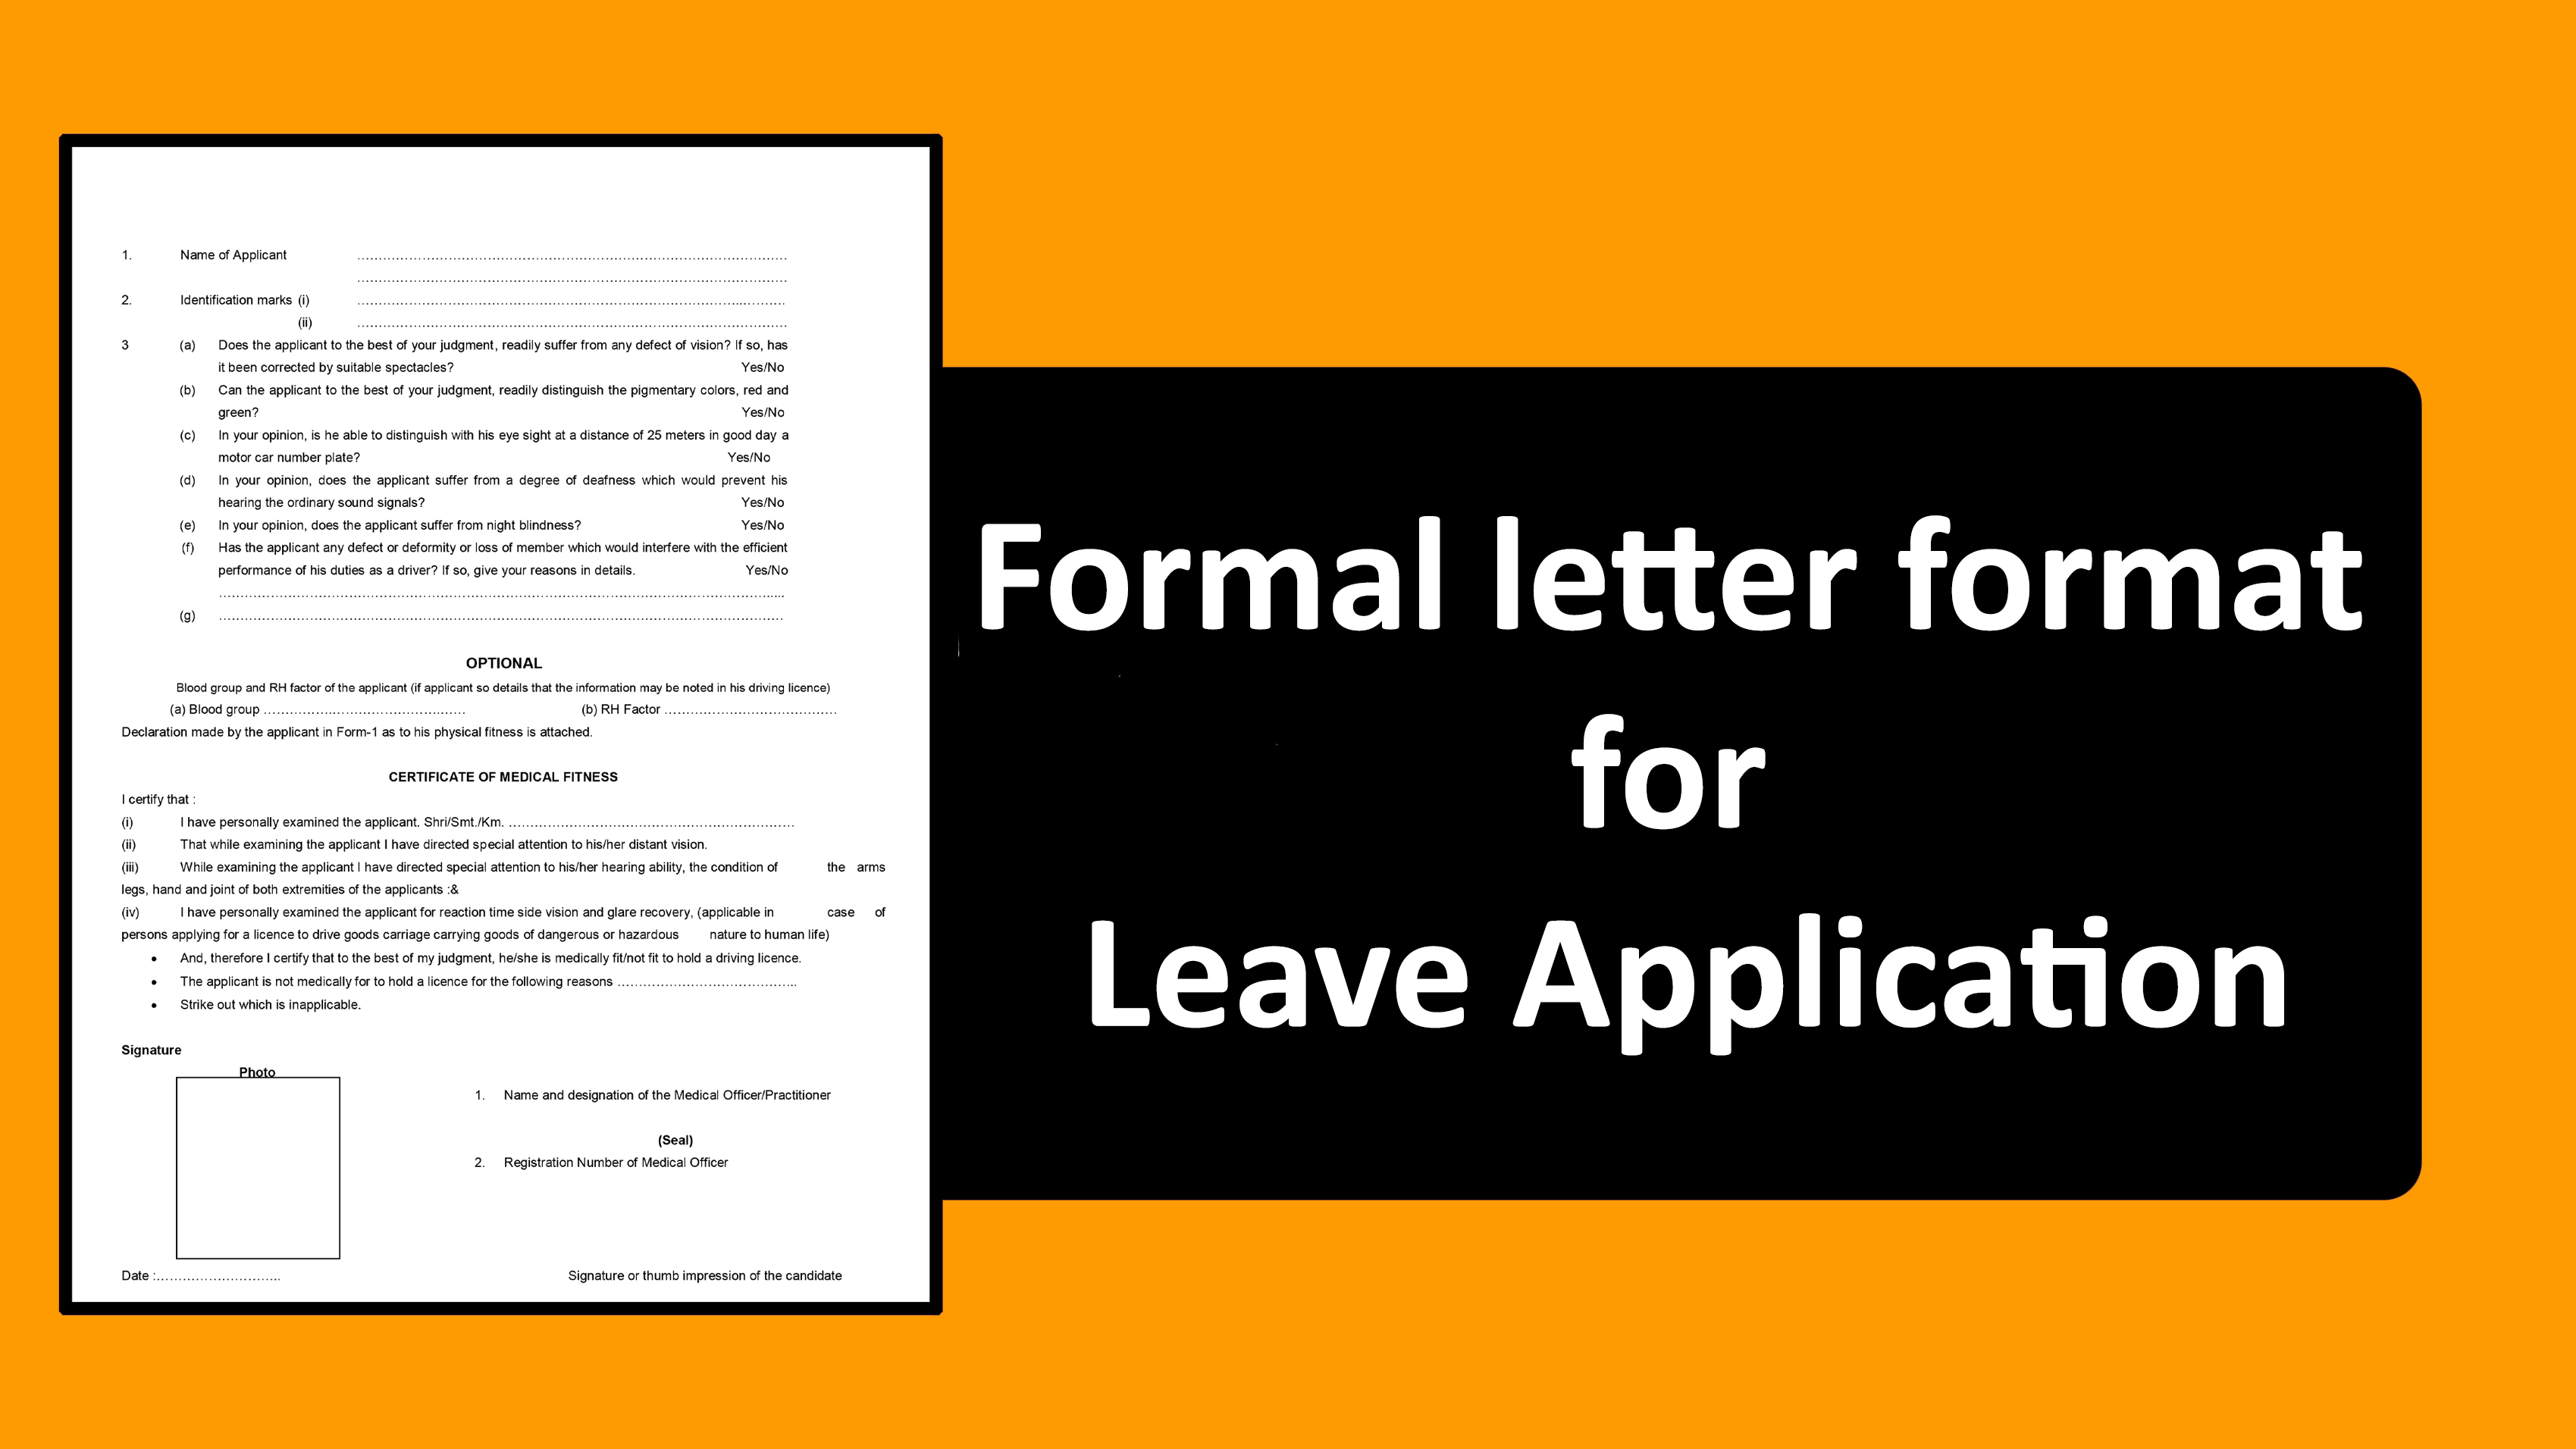 Formal letter format for Leave Application for School - Writing Instructions and Samples